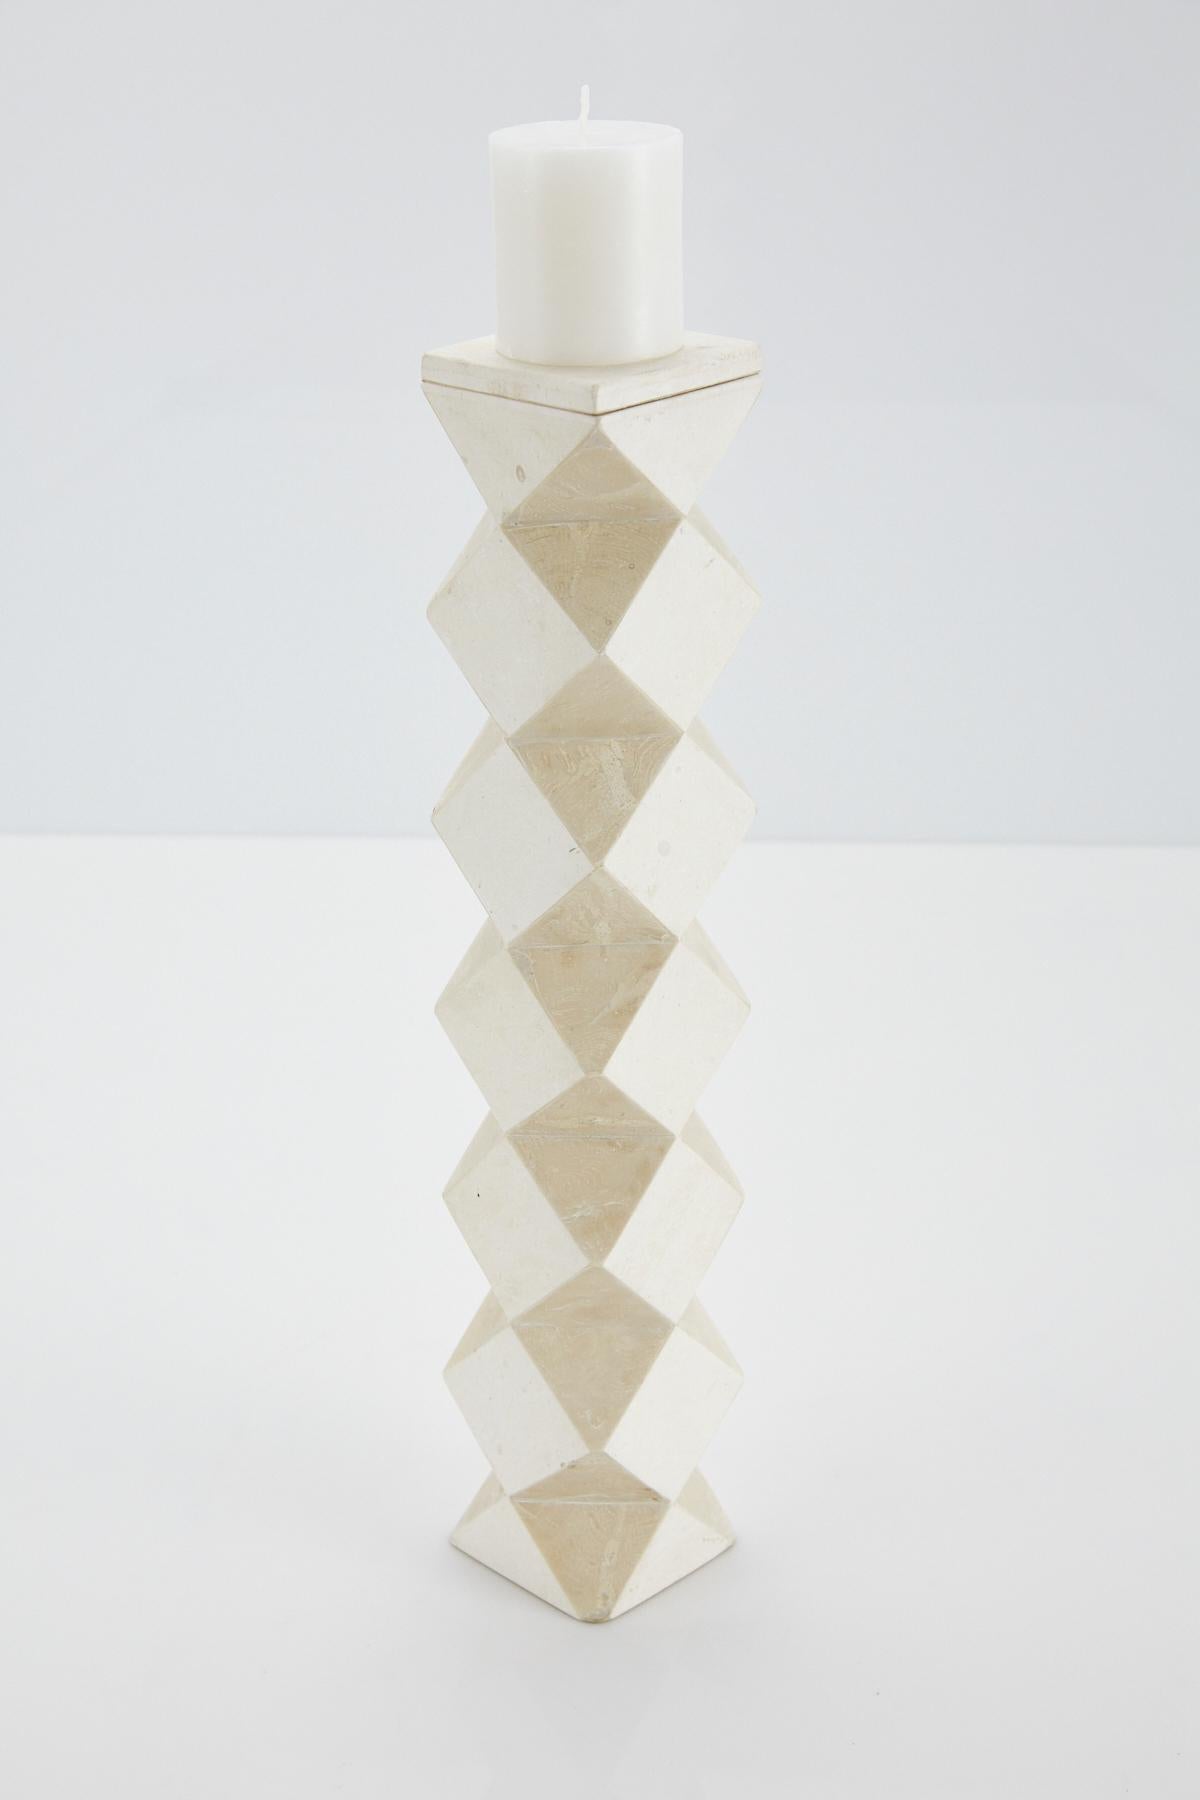 Tall pillar candleholder. Body is comprised of a rectilinear cube with faceted sides, alternating white and beige tessellated stone. The top of this convertible candlestick is removable and can then be used as a vase.

All furnishings are made from